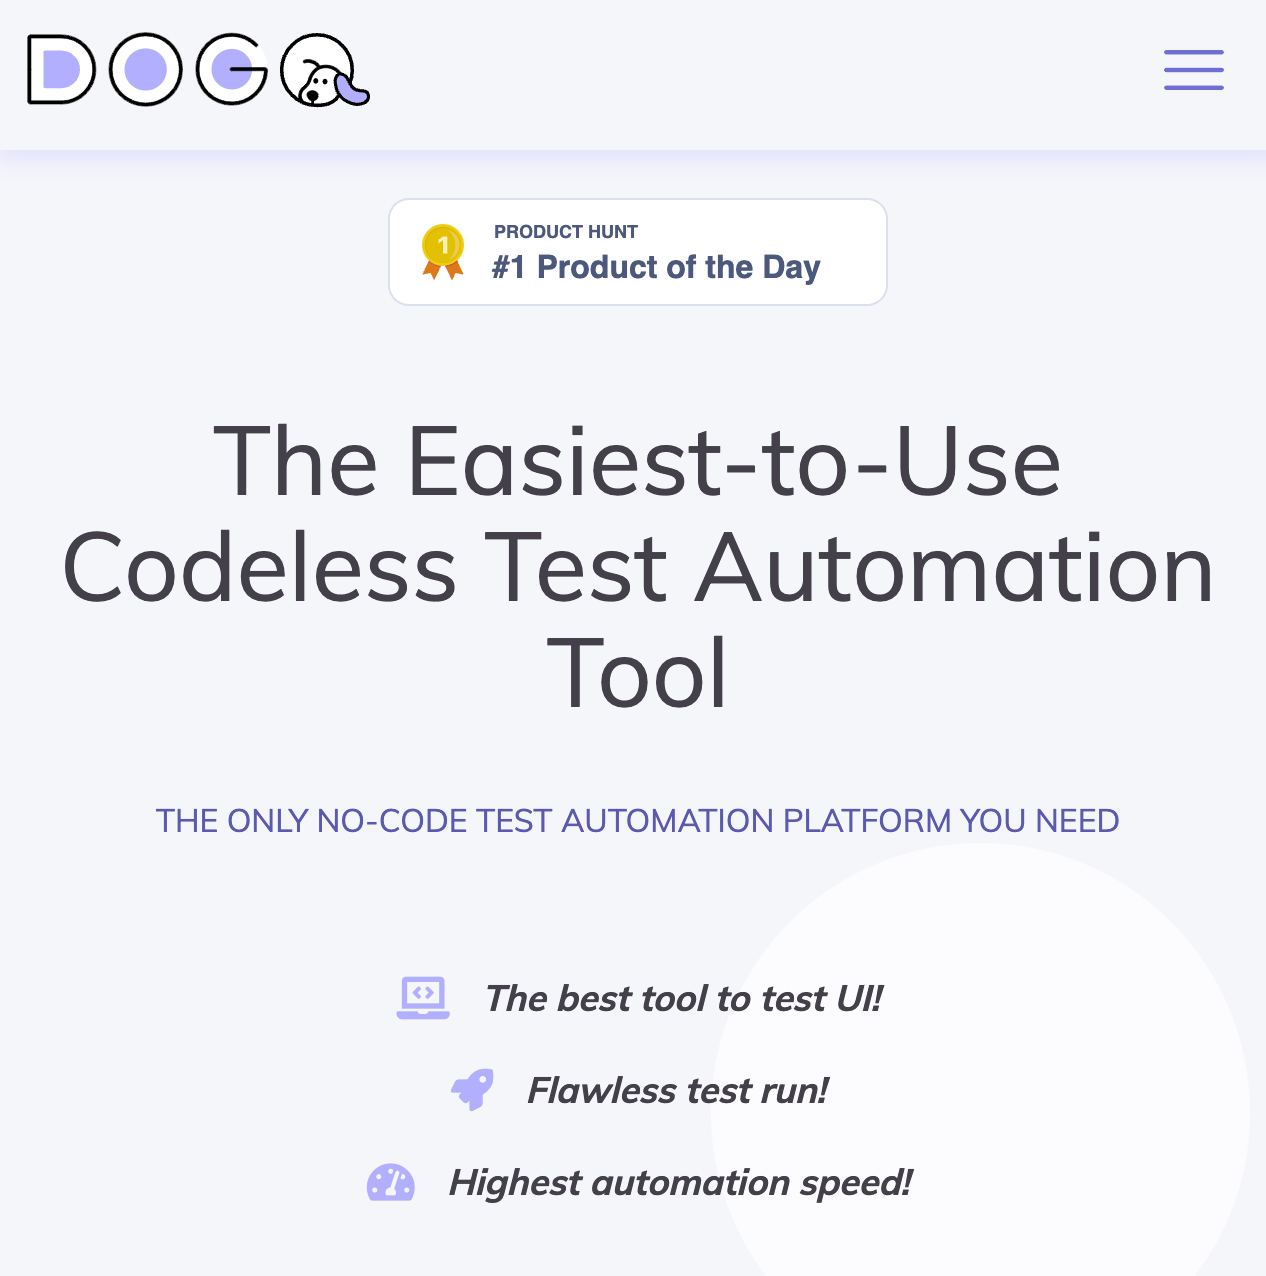 DogQ - The Easiest-to-Use Codeless Test Automation Tool